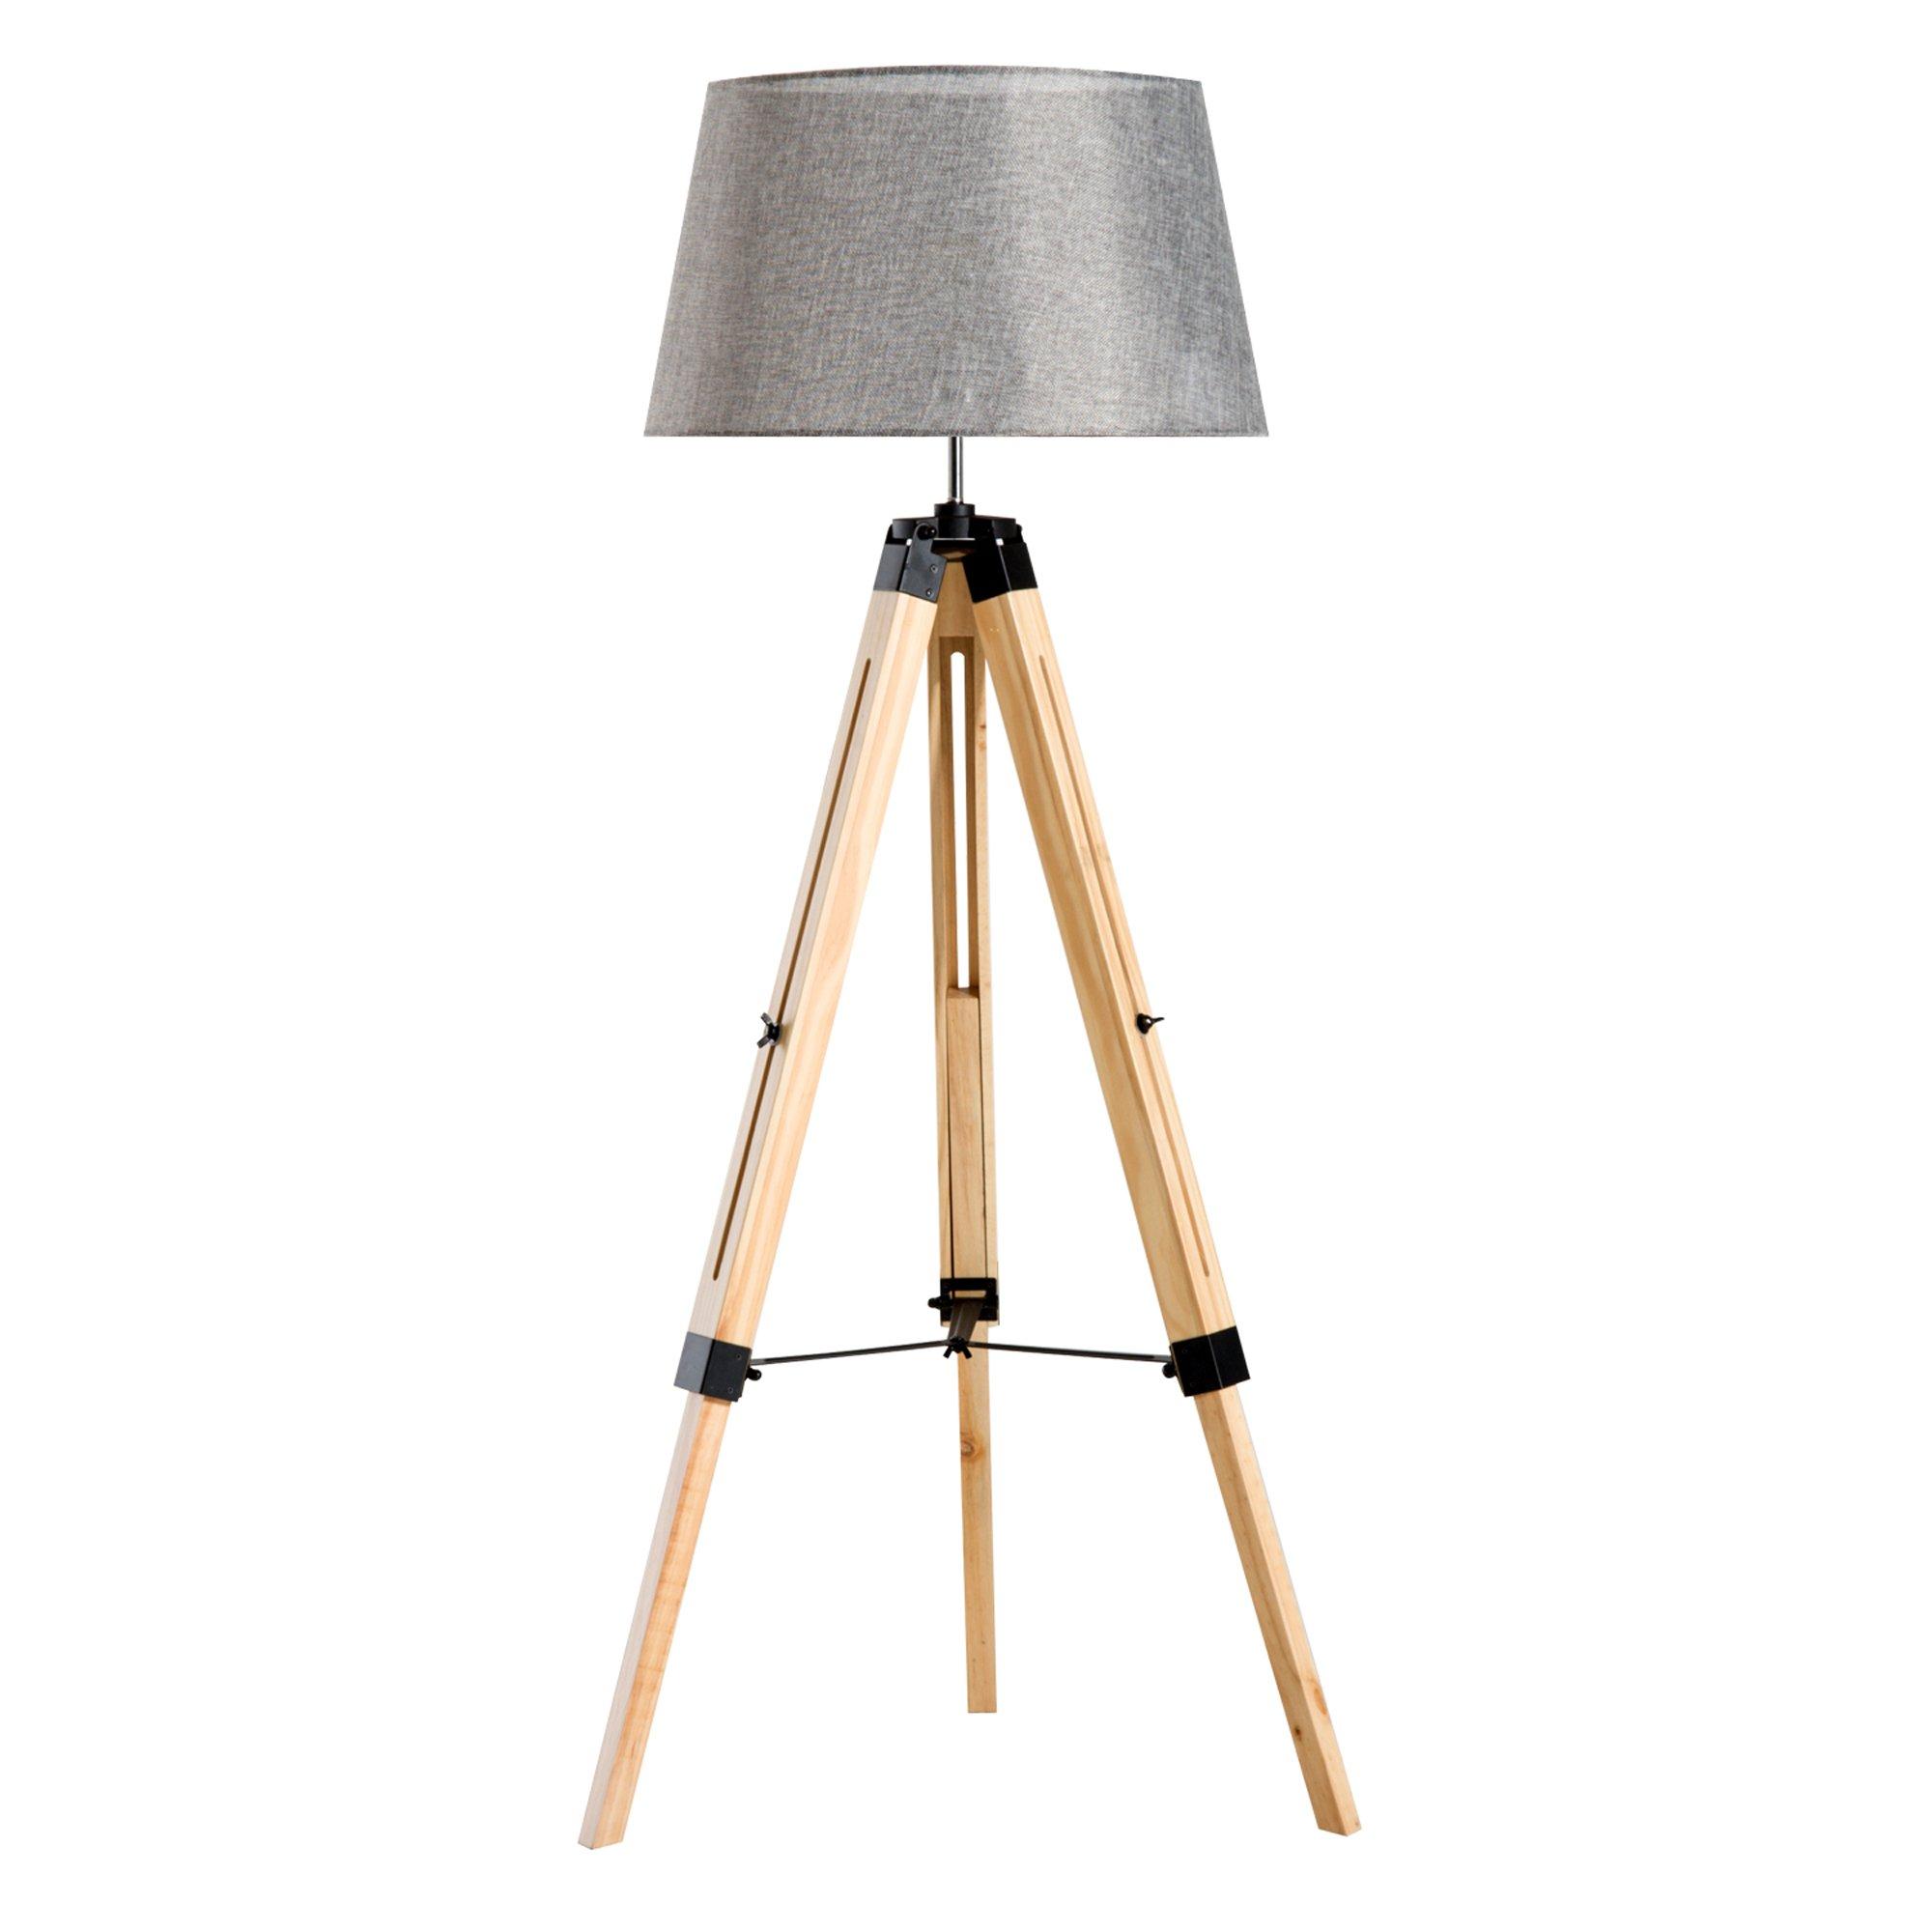 Classic Floor Lamp with Wooden Tripod  Base Adjustable Height